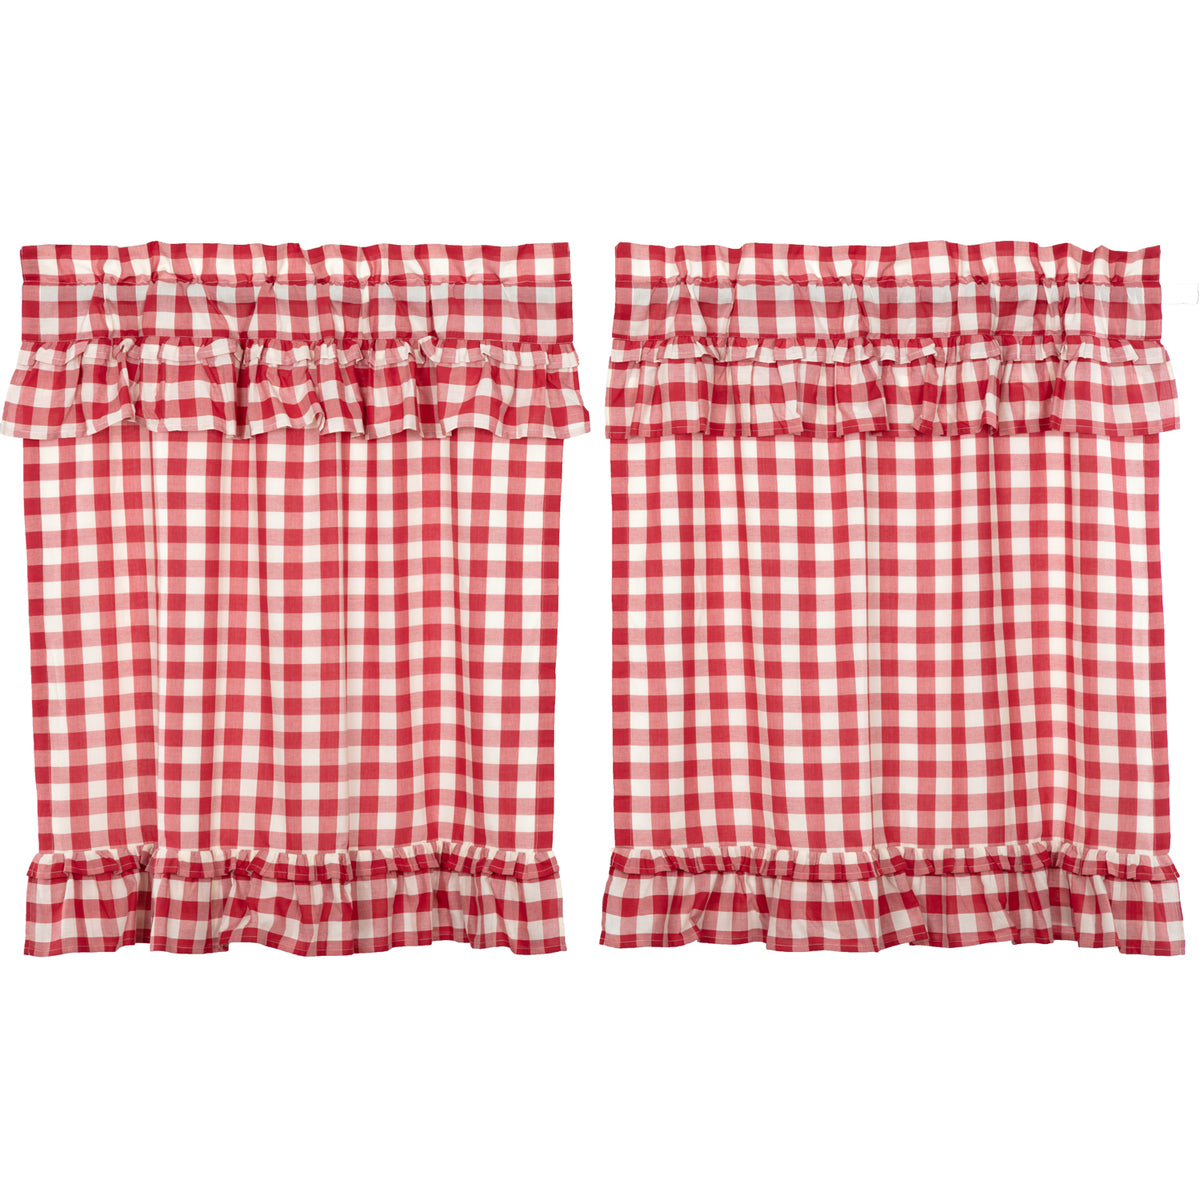 April & Olive Annie Buffalo Red Check Ruffled Tier Set of 2 L36xW36 By VHC Brands